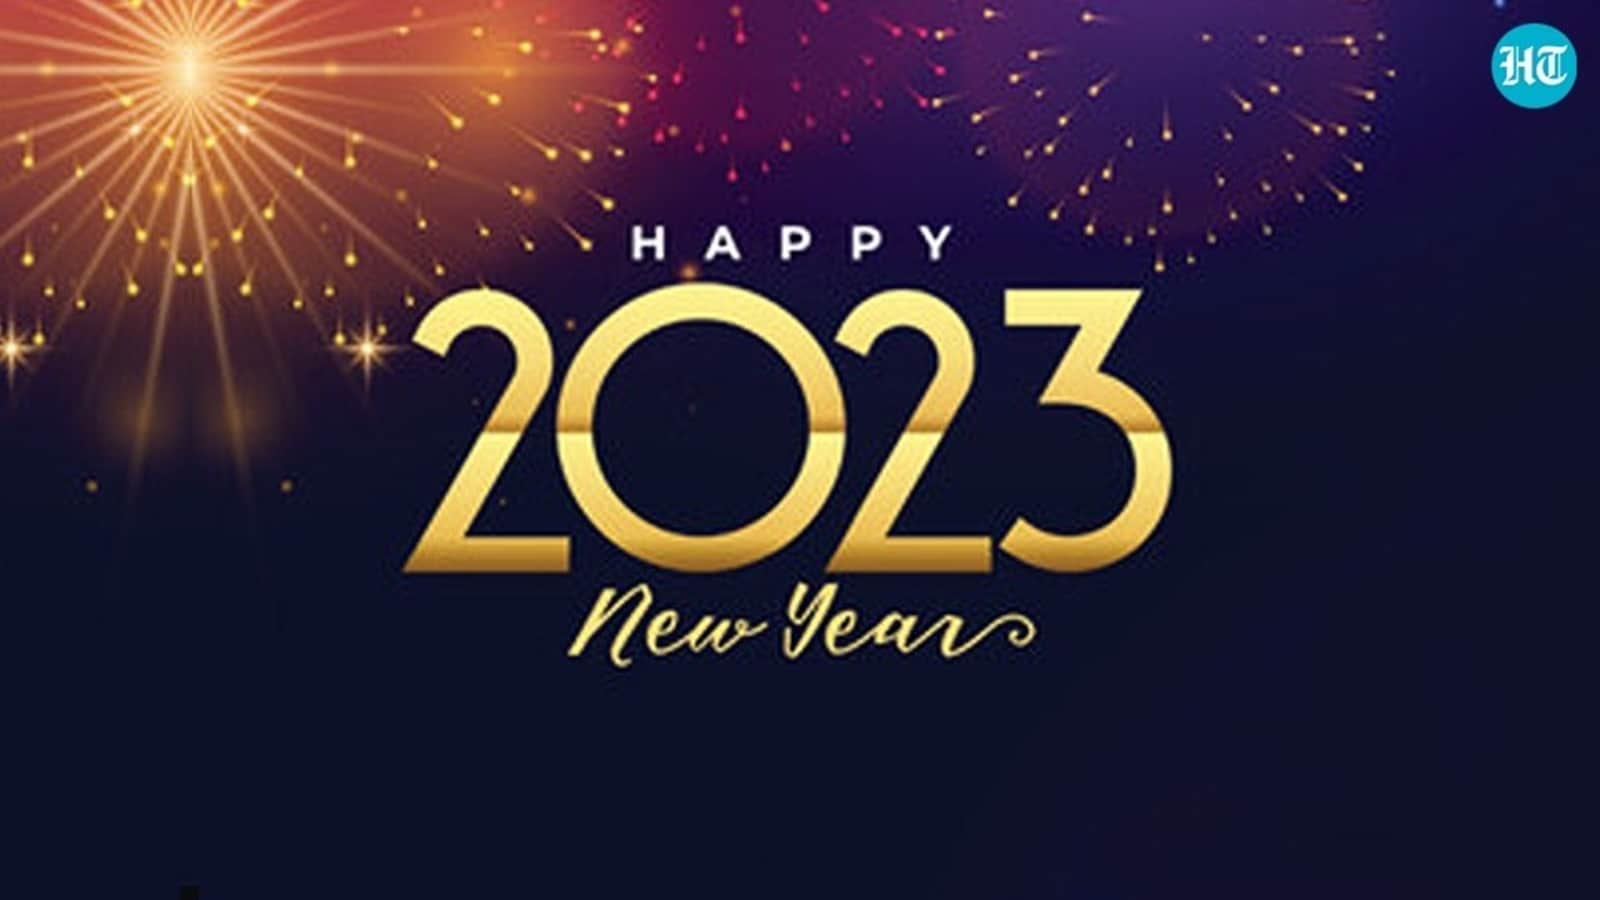 Happy New Year 2023: Best wishes, Shayari, image, greetings, messages to share with family and friends on January 1